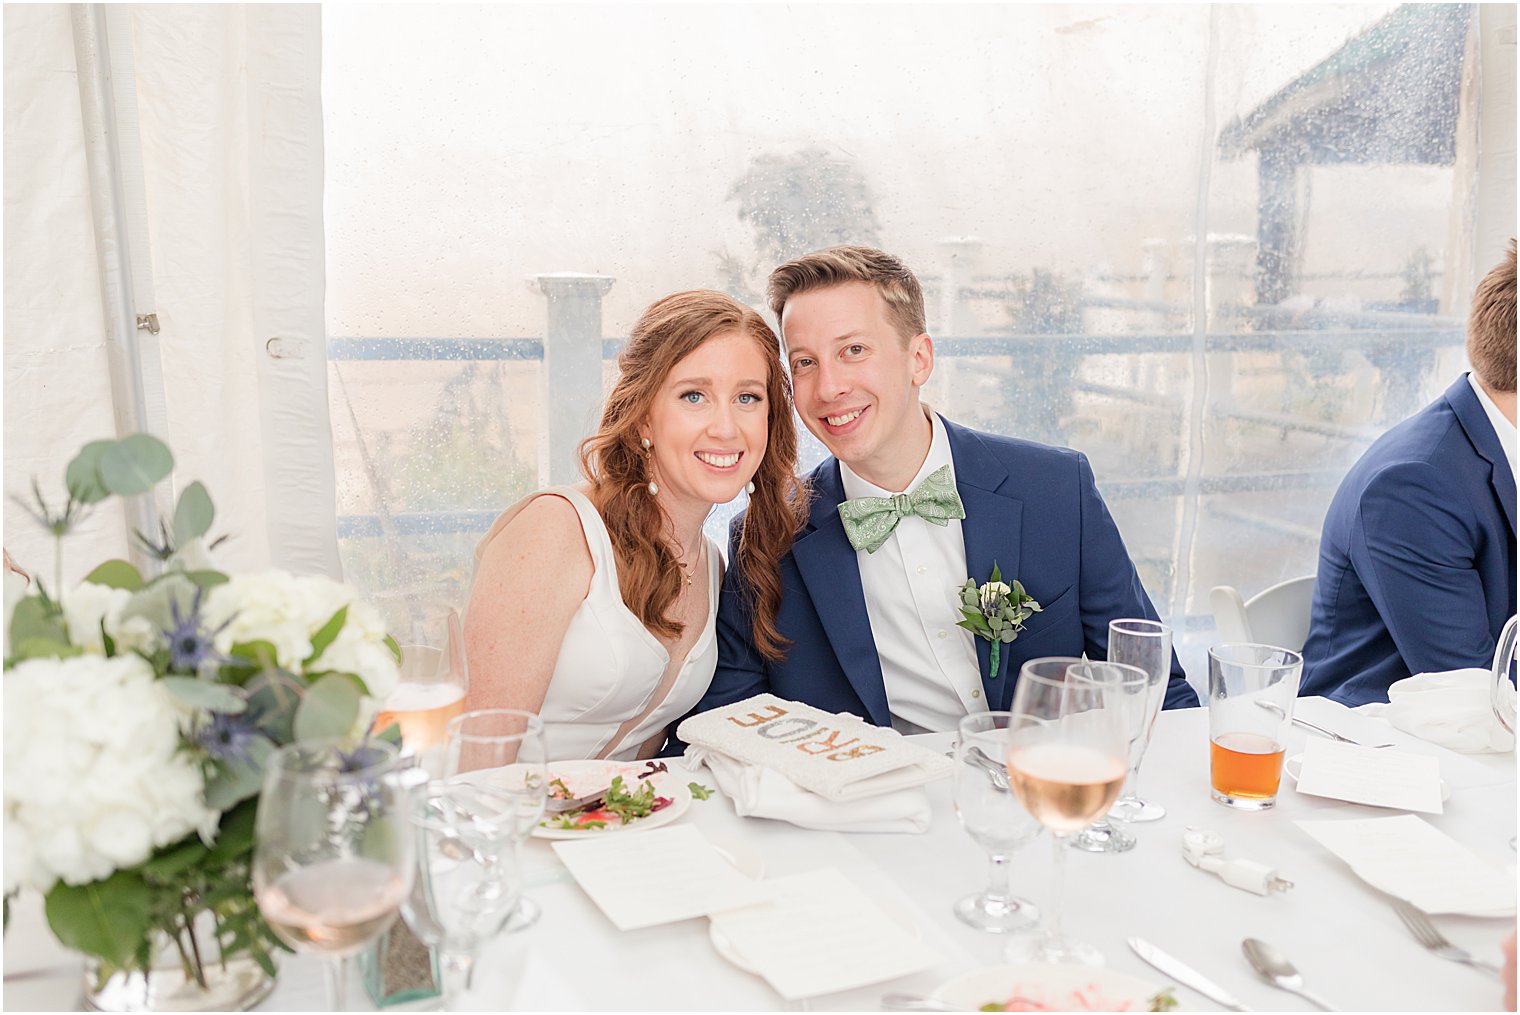 newlyweds sit at table together during NJ wedding reception